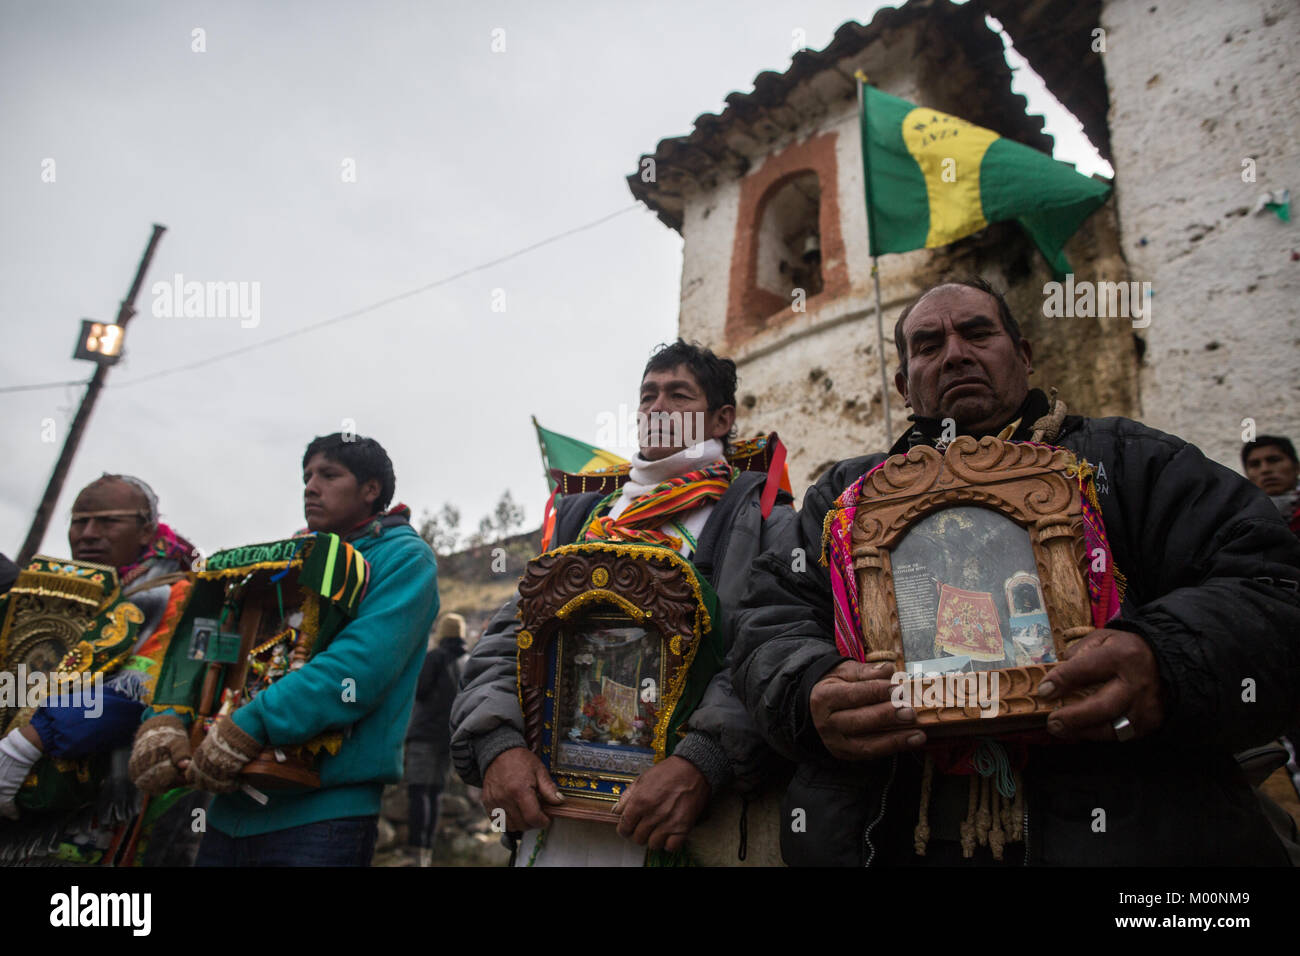 Cusco, Peru. 29th Dec, 2017. Patterns of each nation carry images of the Lord of Qoyllur Riti in the Church of Mahuayani.Quyllur Rit'i or Star Snow Festival is a spiritual and religious festival held Annually at the Sinakara Valley in the Cusco Region of Peru. Groups of Quero indigenous people climb Ausangate Mountain, at 6362m, in search of the Snow Star Which is reputedly buried Within the mountain.According to the chroniclers, the Qoyllur Rit'i is the Christ that the Church sent painted on a rock at almost 5,000 meters above sea level. Sought to erase the worship of the Inca mountain Stock Photo